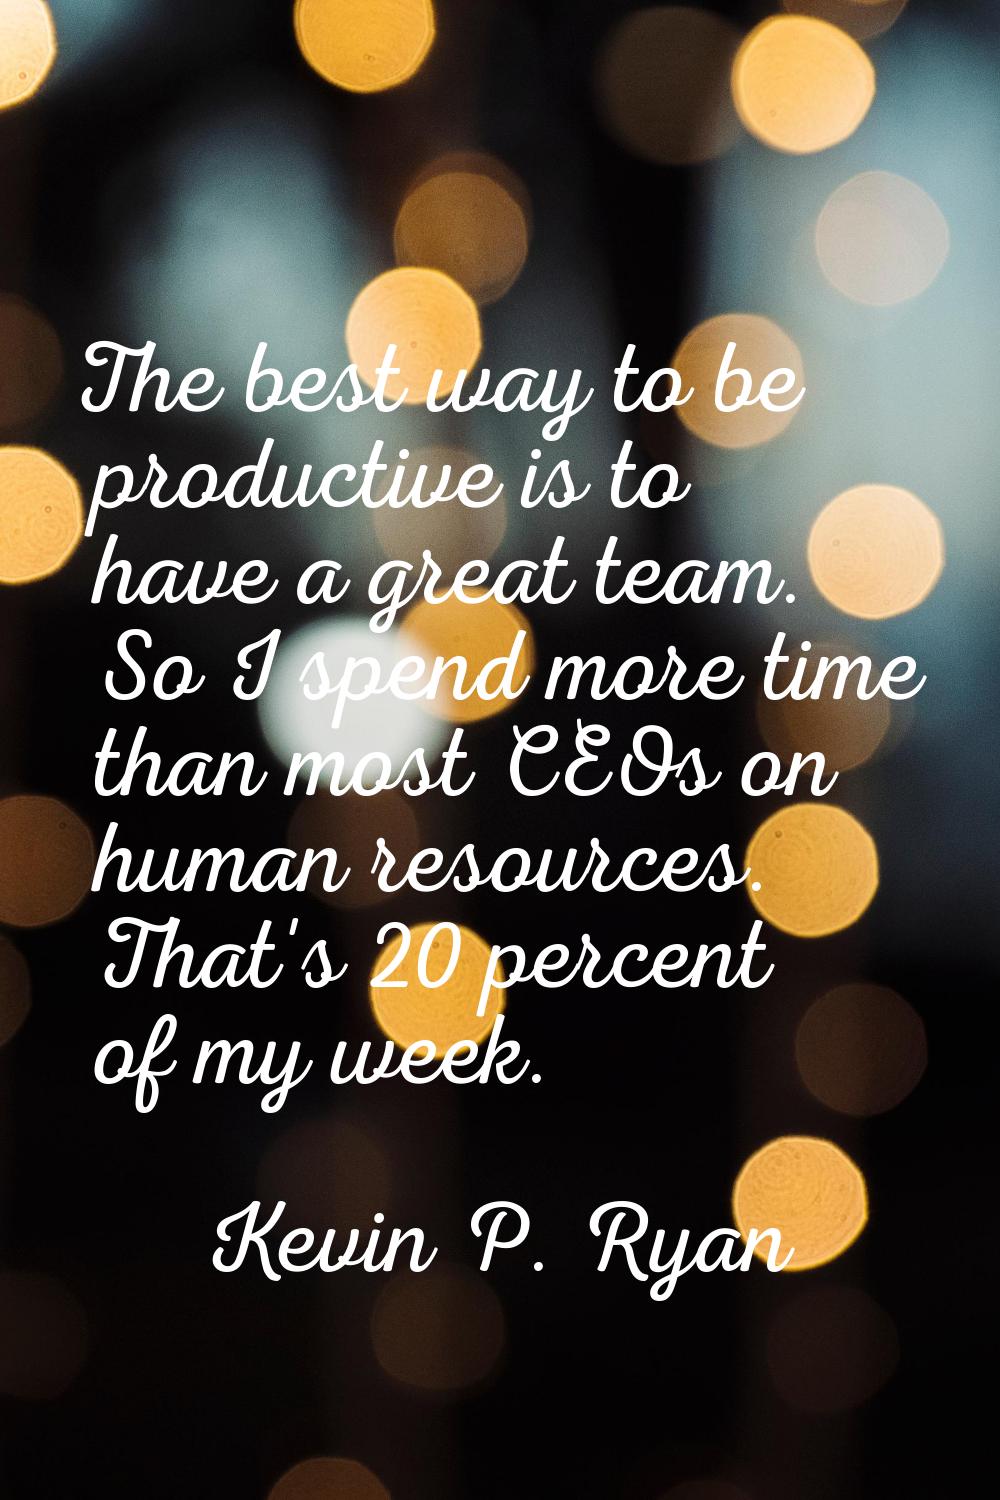 The best way to be productive is to have a great team. So I spend more time than most CEOs on human